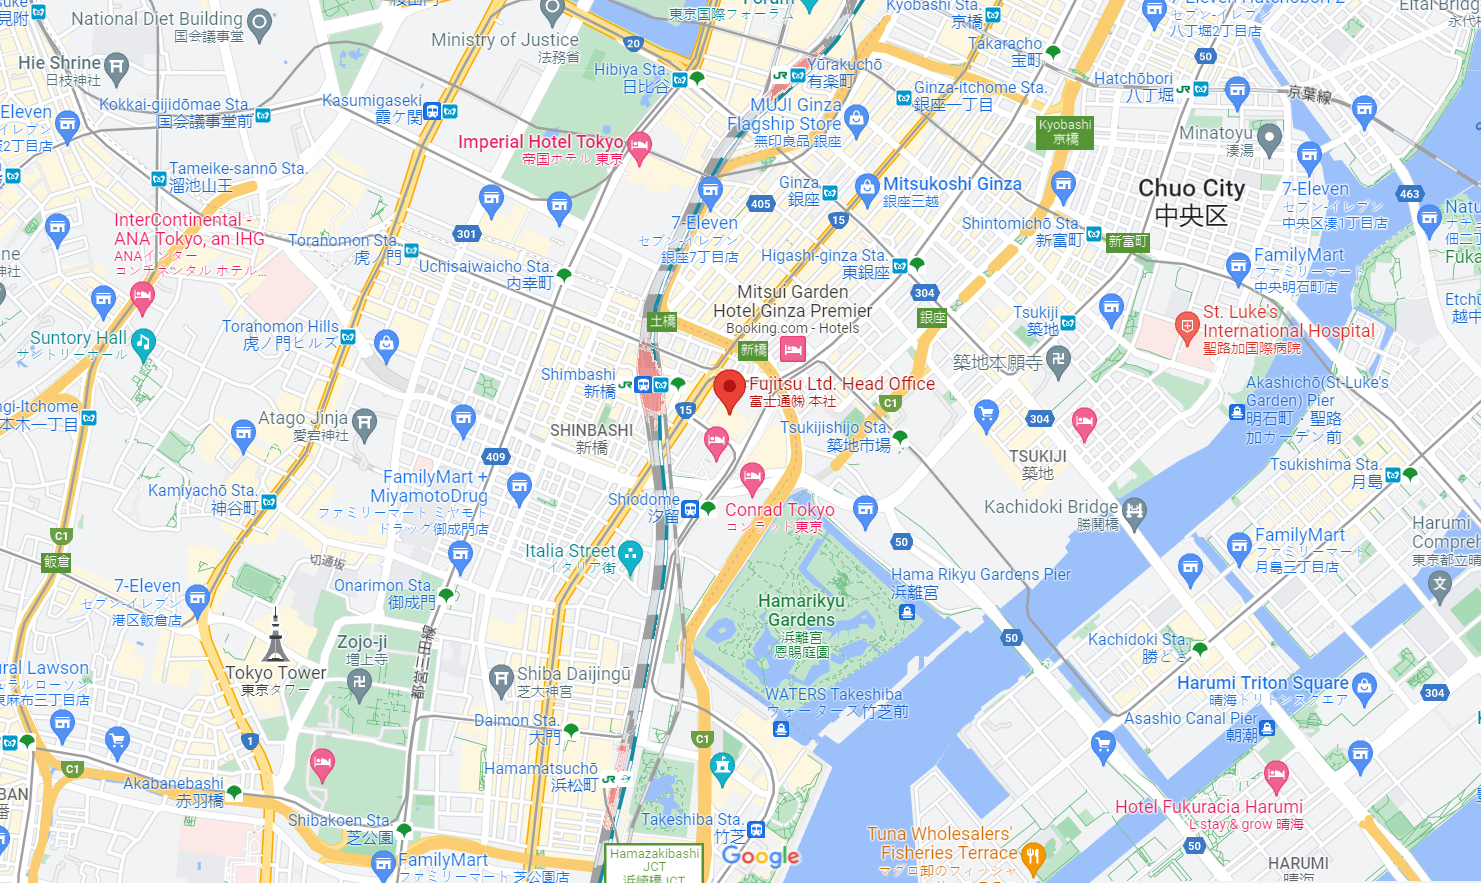 Google Map showing the Fujitsu office location in Tokyo and the surrounding area